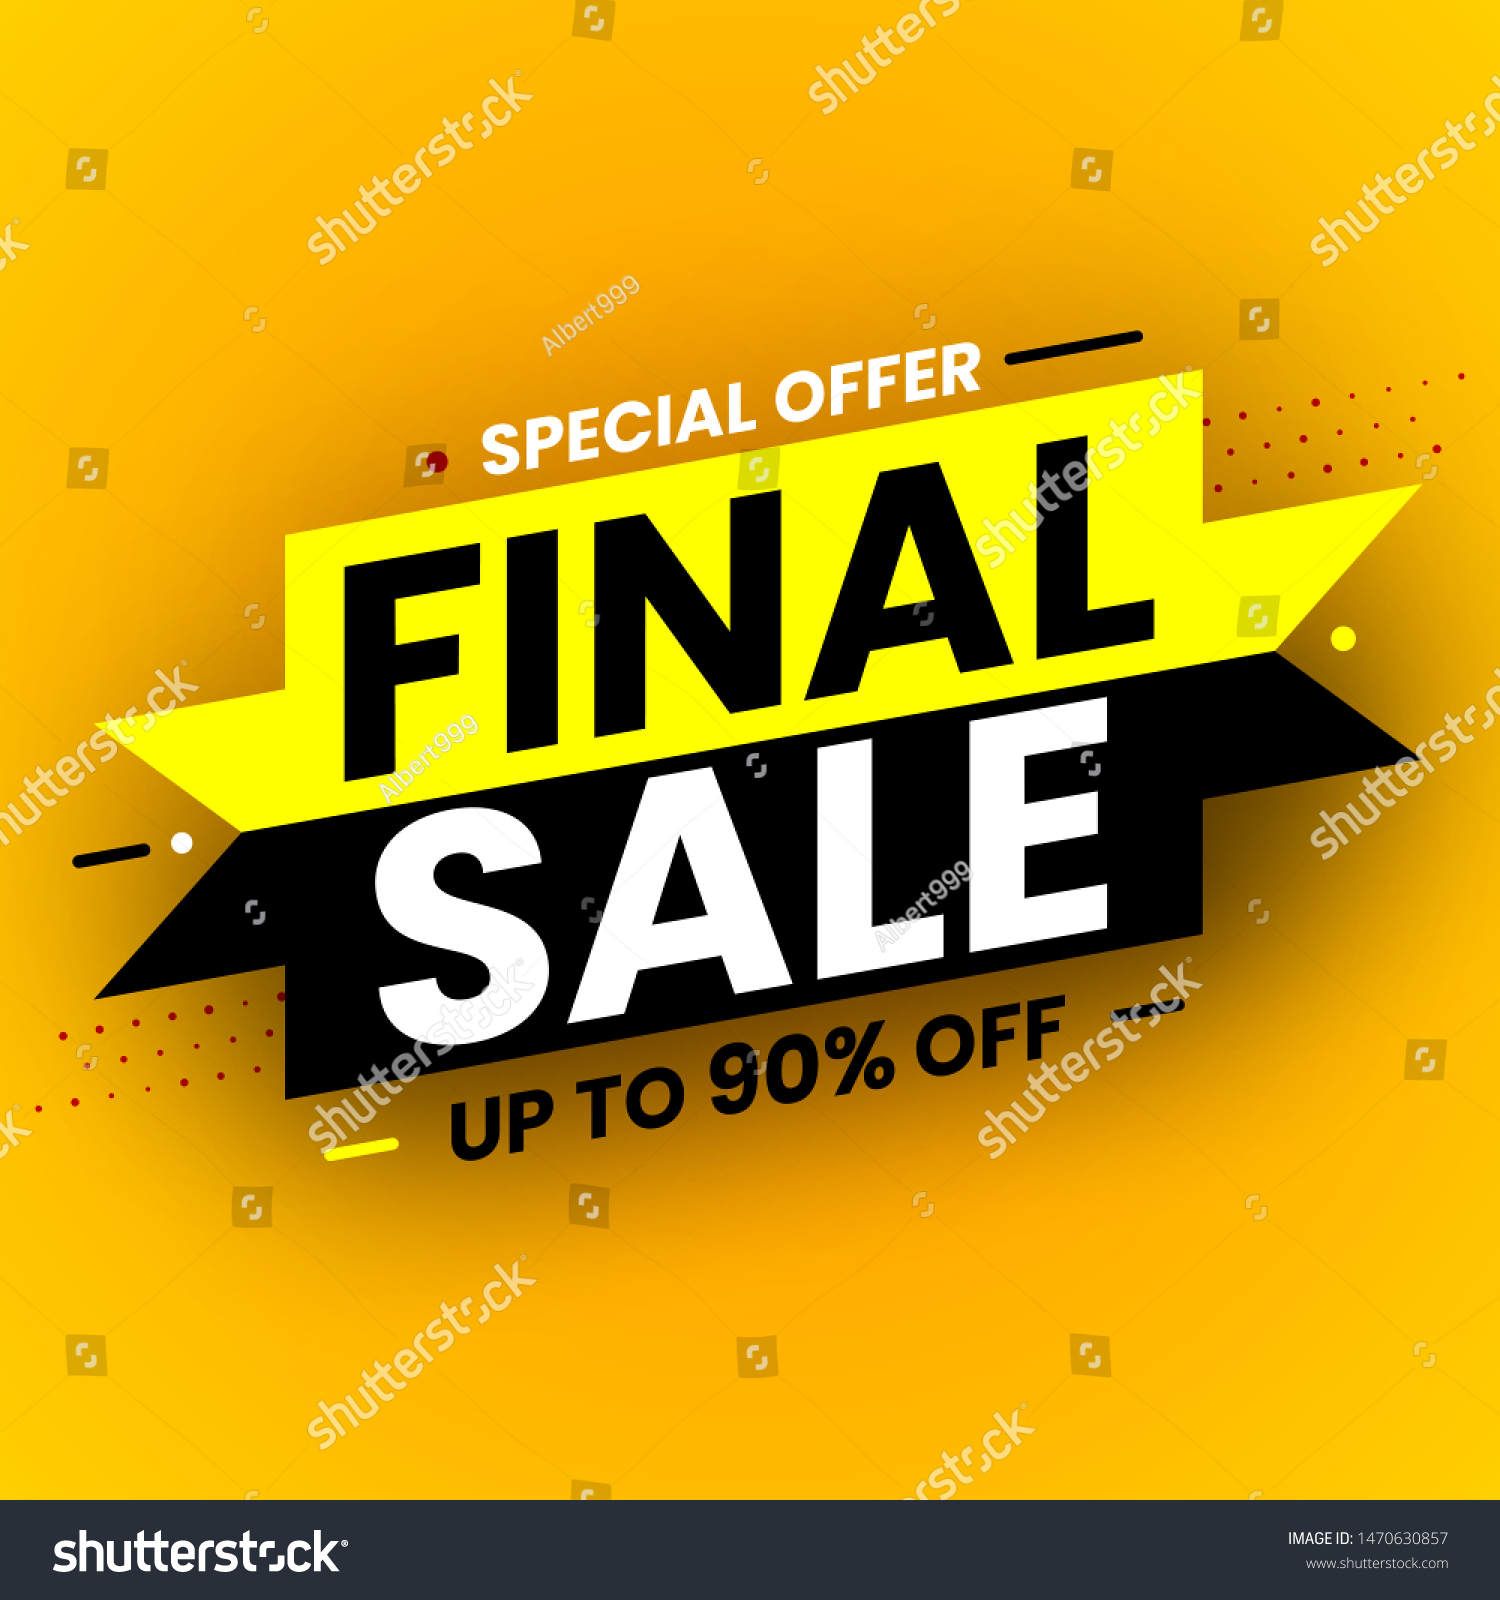 Black and yellow final sale banner, special offer. Vector illustration. #1470630857